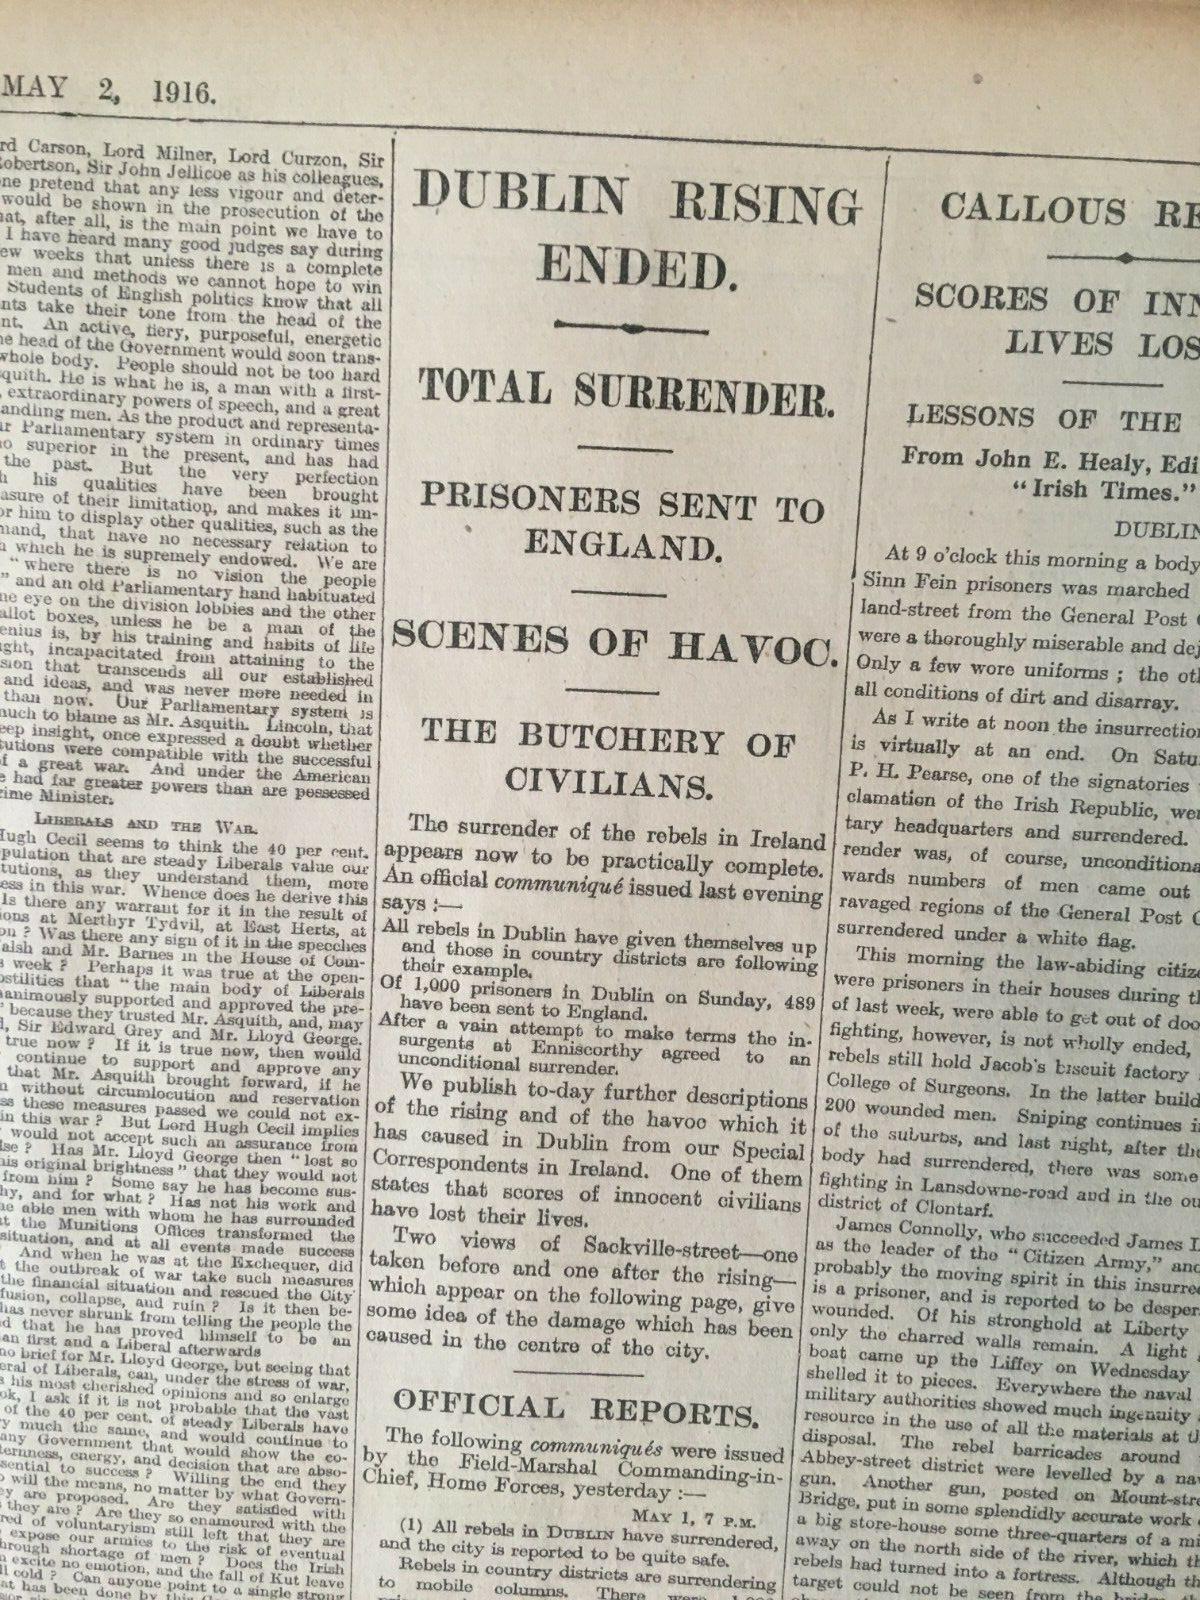 Easter Rising Rebellion 1916 Original Complete Newspaper 2nd May Images & Reports - Image 4 of 12